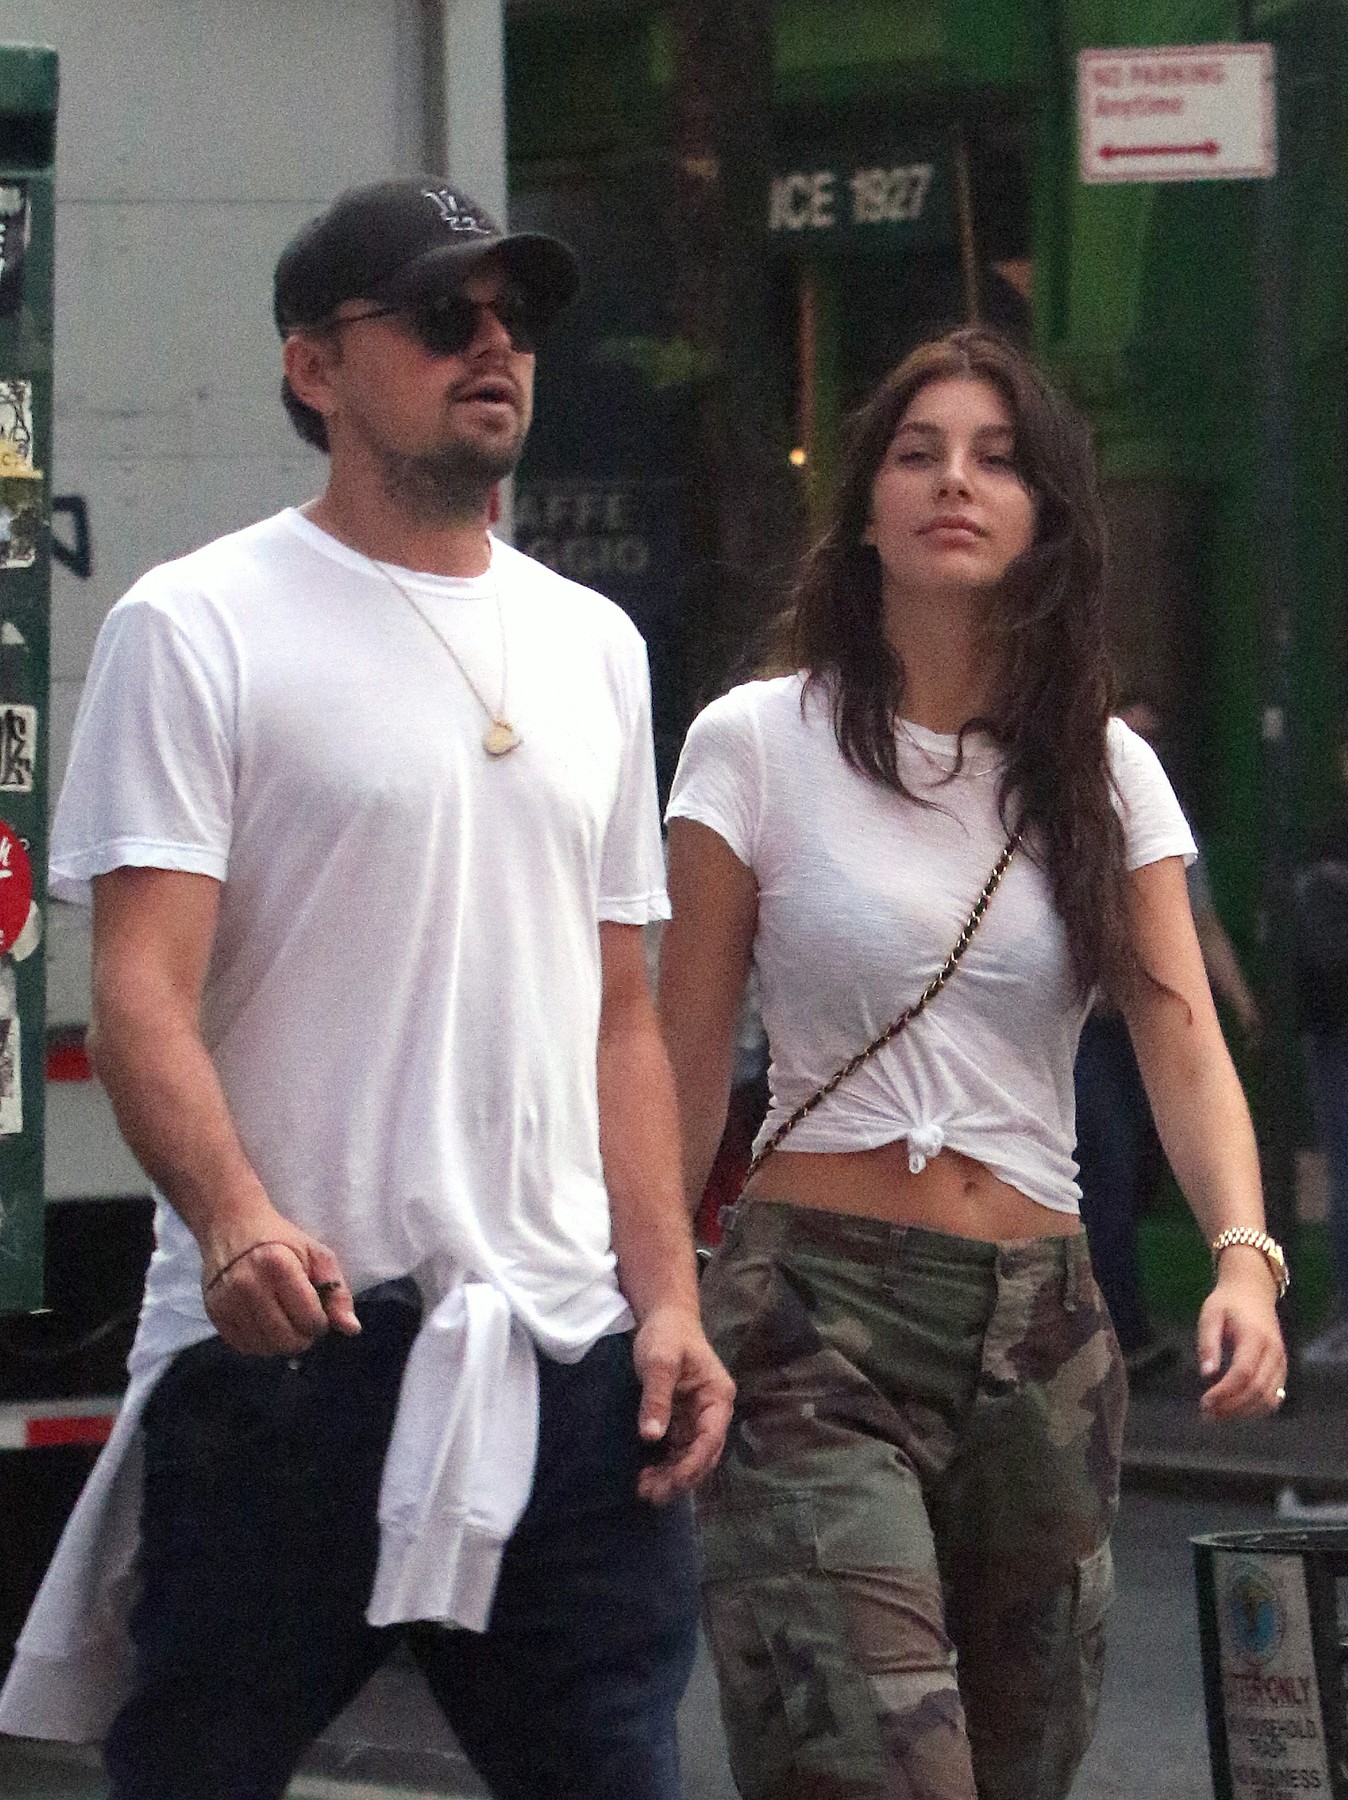 May 15 2018, New York City

Leonardo DiCaprio and his girlfriend Camila Morrone enjoy a walk in the West Village on May 15 2018 in New York City

By Line: John Sheene/ACE Pictures


ACE Pictures Inc
Tel: 6467670430
Email: info@acepixs.com, Image: 371867848, License: Rights-managed, Restrictions: , Model Release: no, Credit line: John Sheene / Acepixs / Profimedia